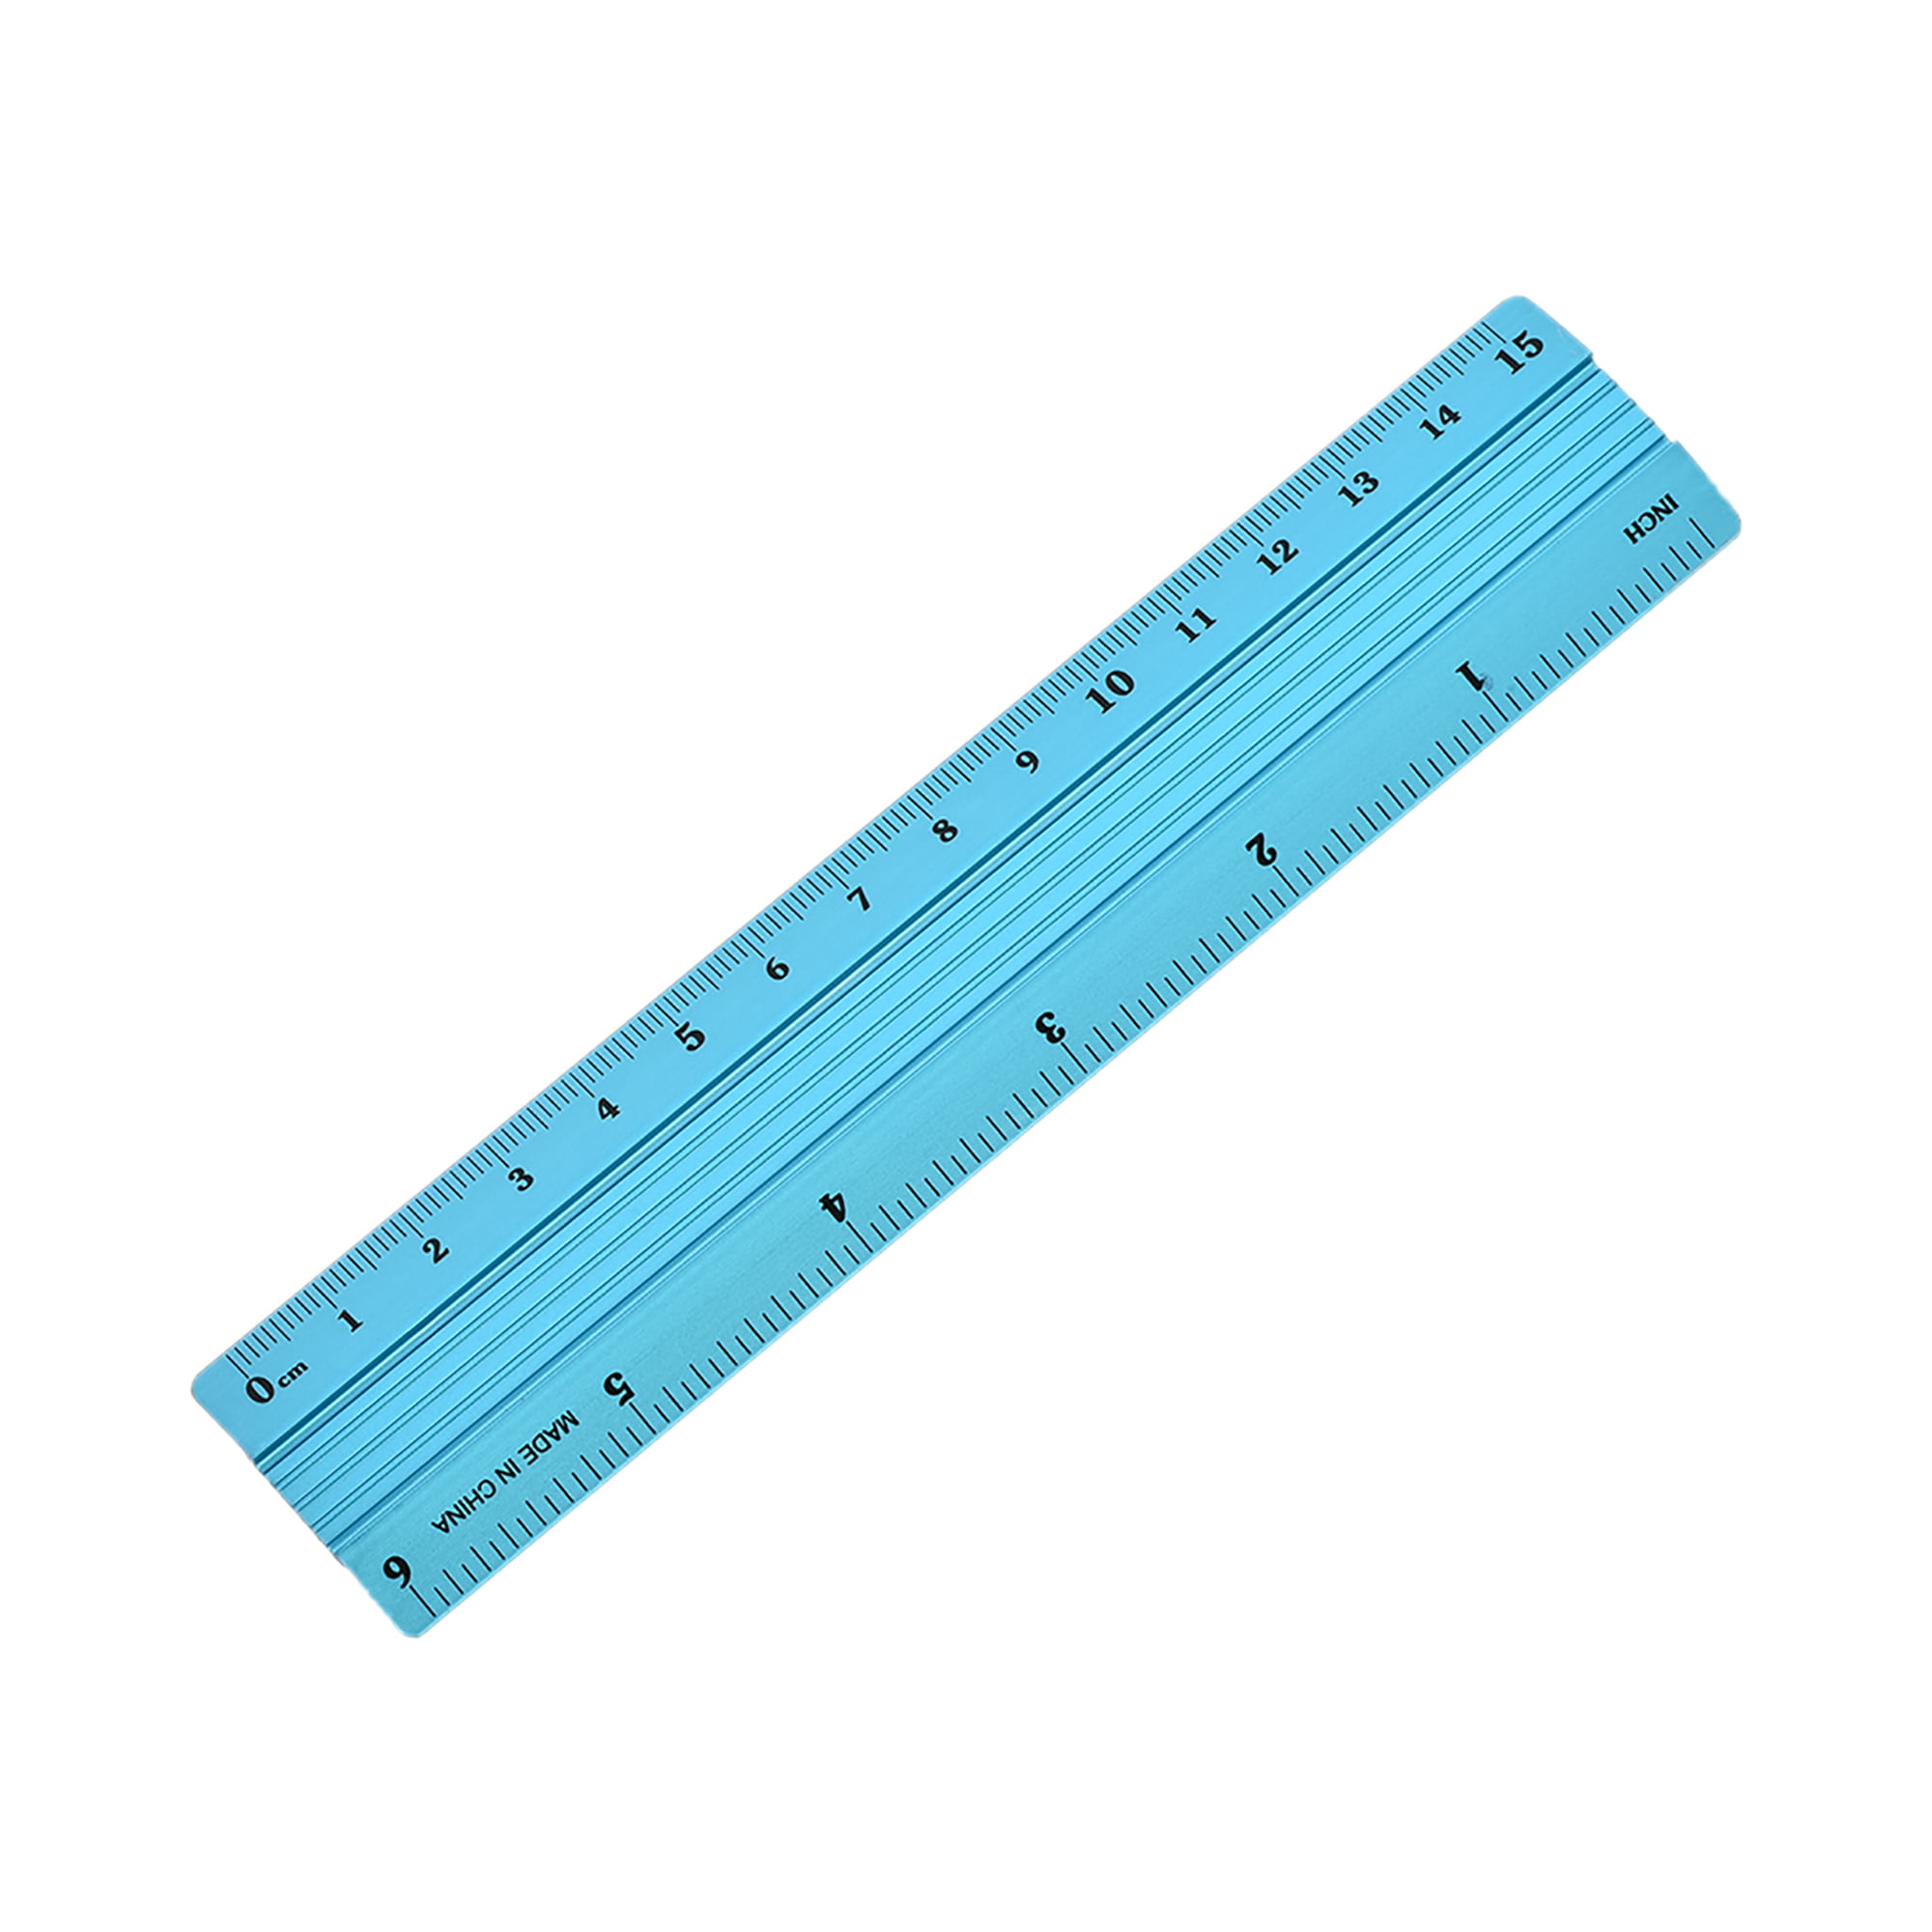 6 Select-A-Scale (TM) Architect Drafting Ruler - 7506